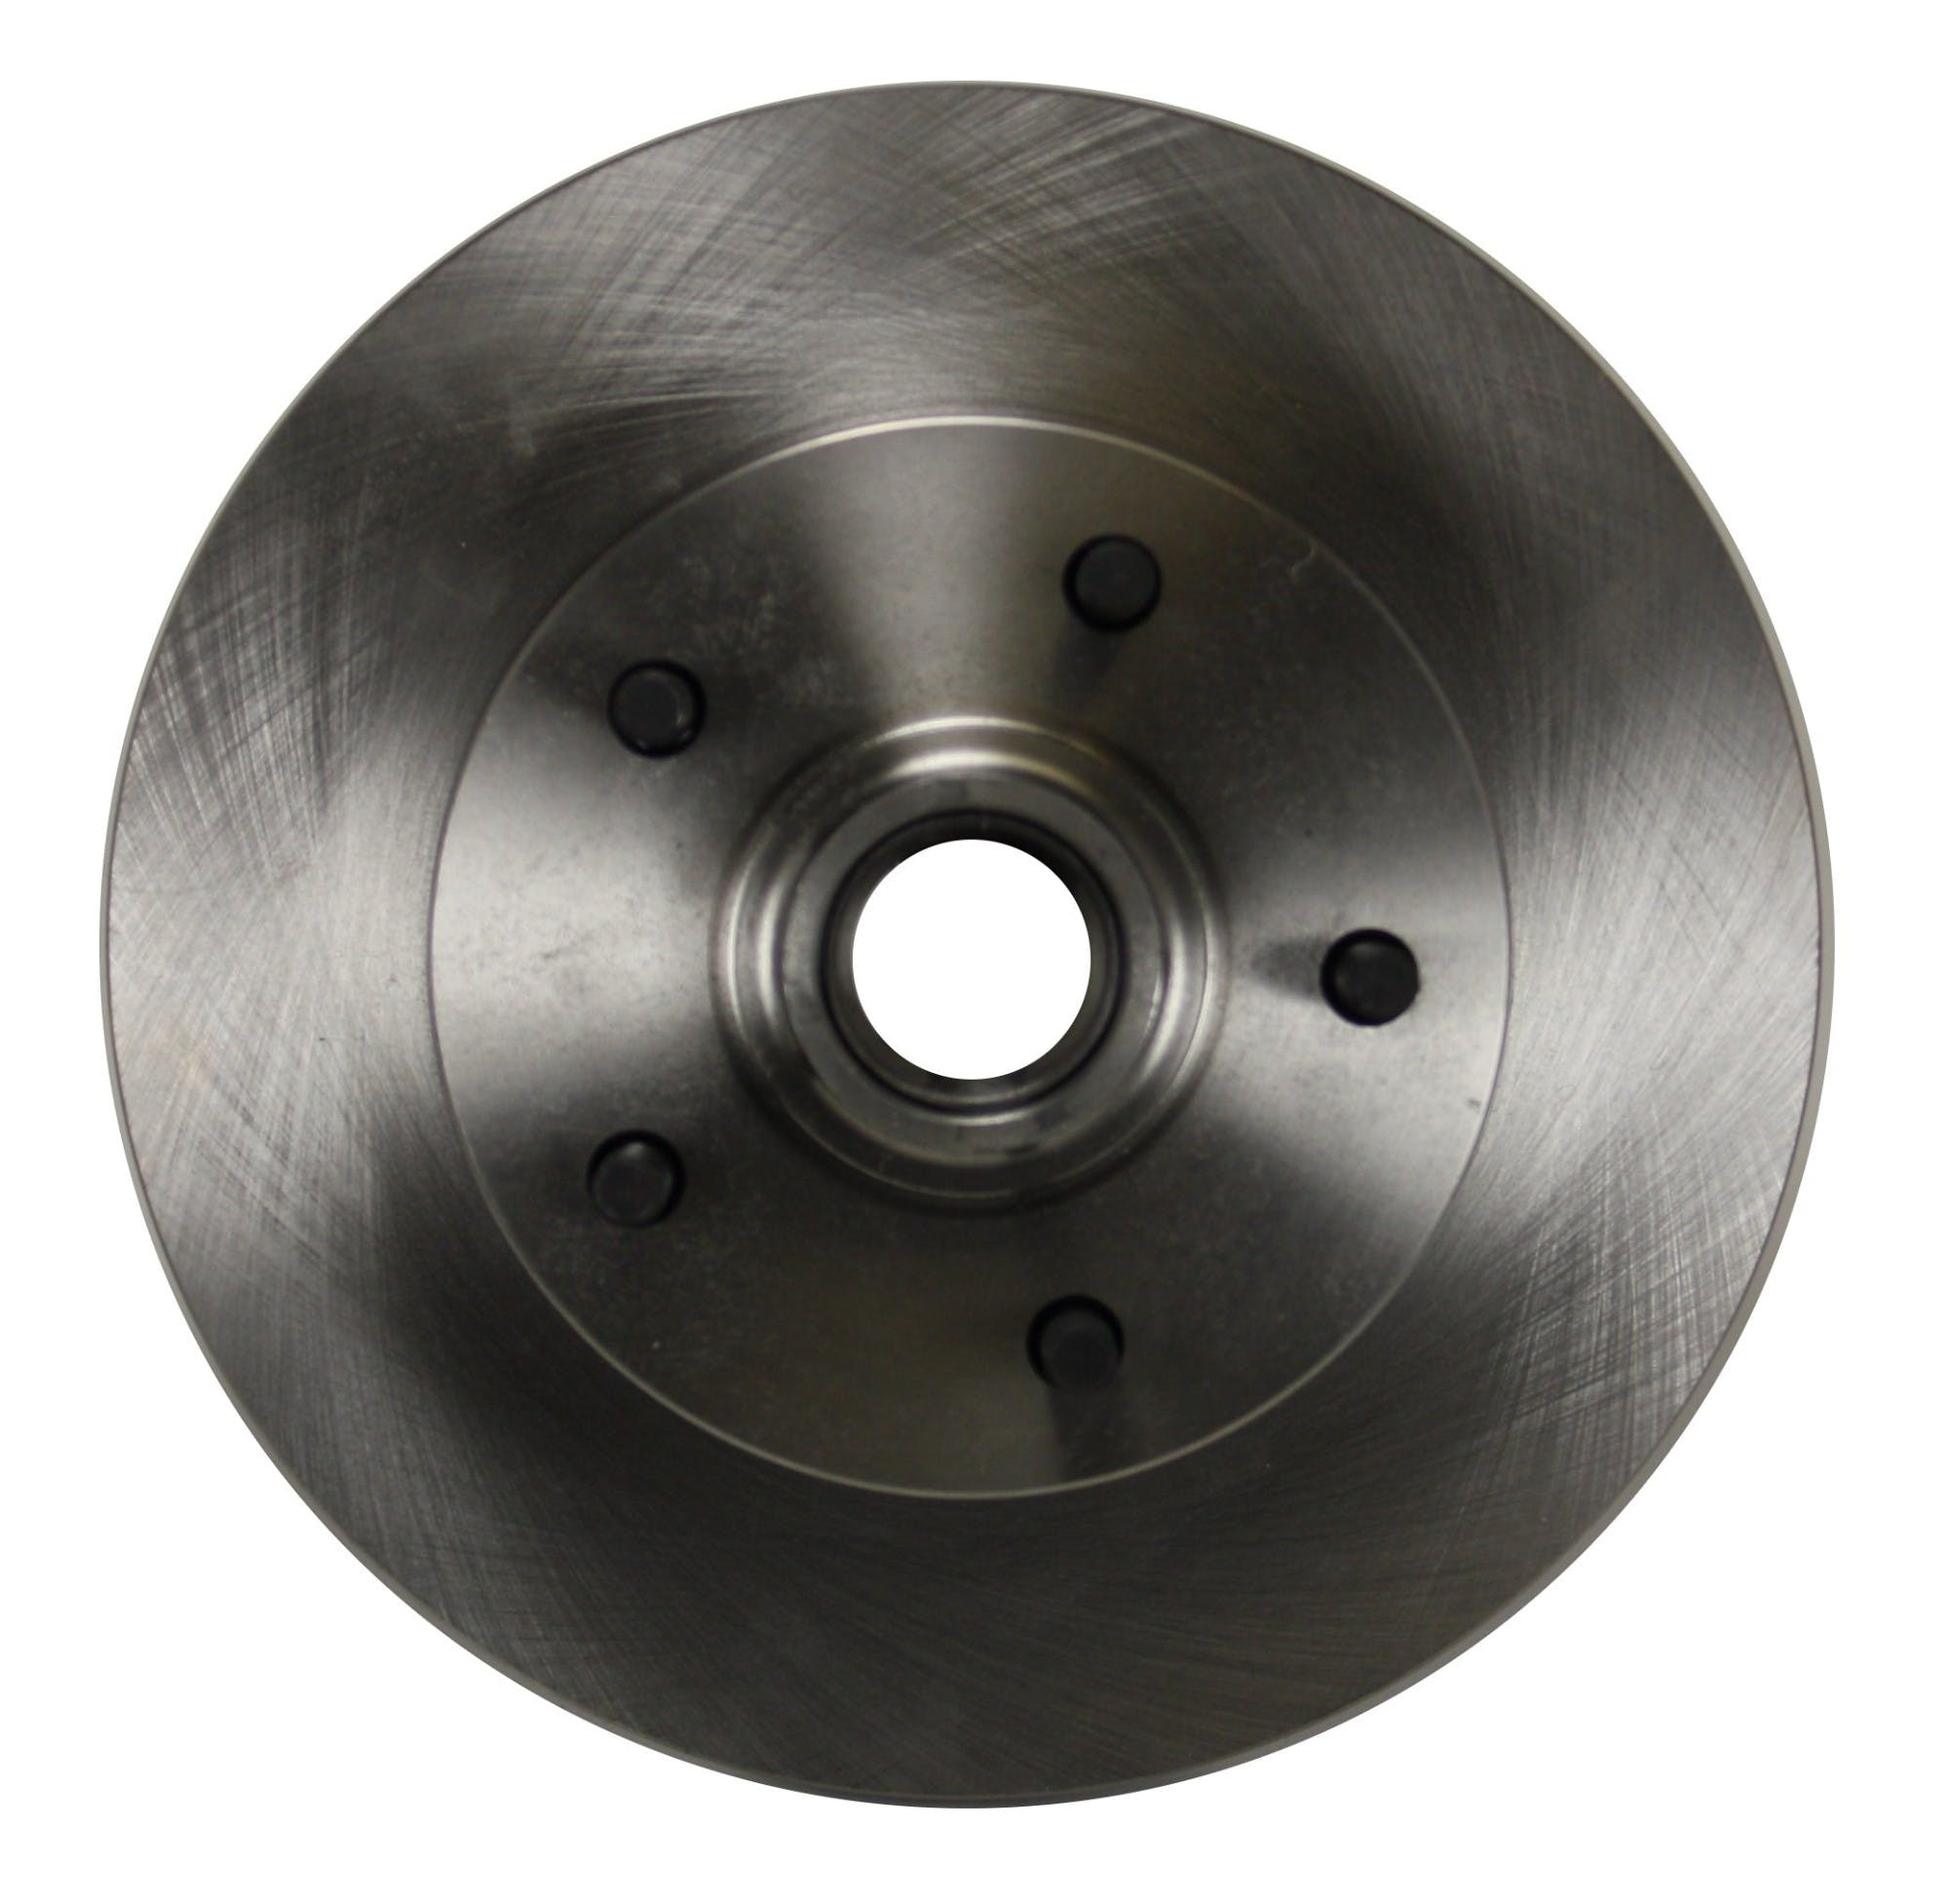 LEED Brakes FC1002-E181 Power Front Disc Kit - 9 in - Disc Drum - Zinc